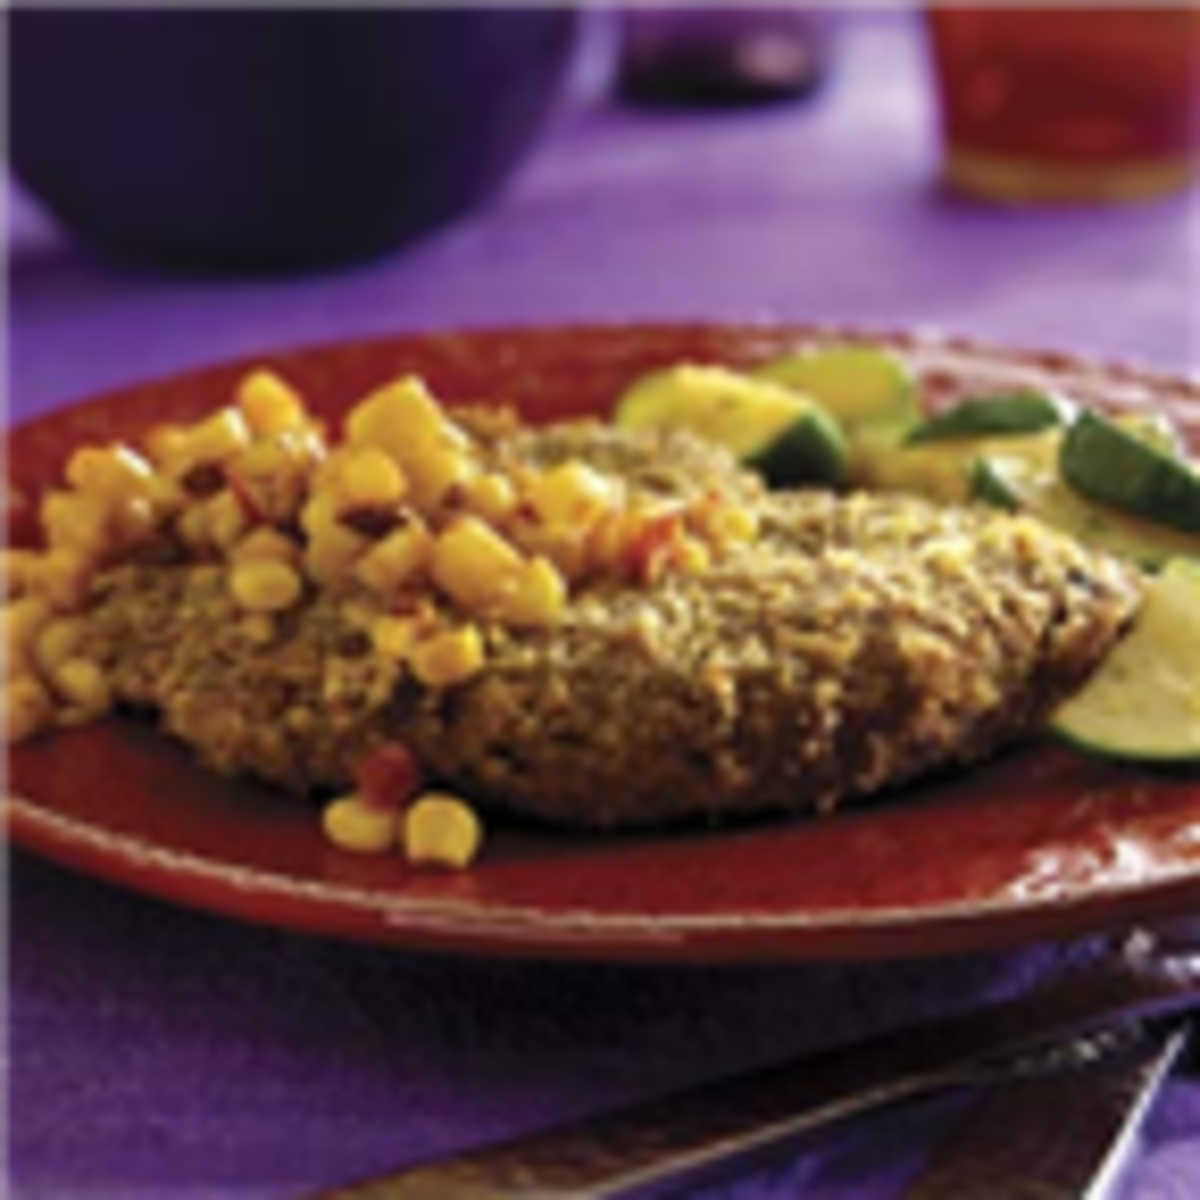 Mexican-Style Milanesa with Smoky Corn Relish